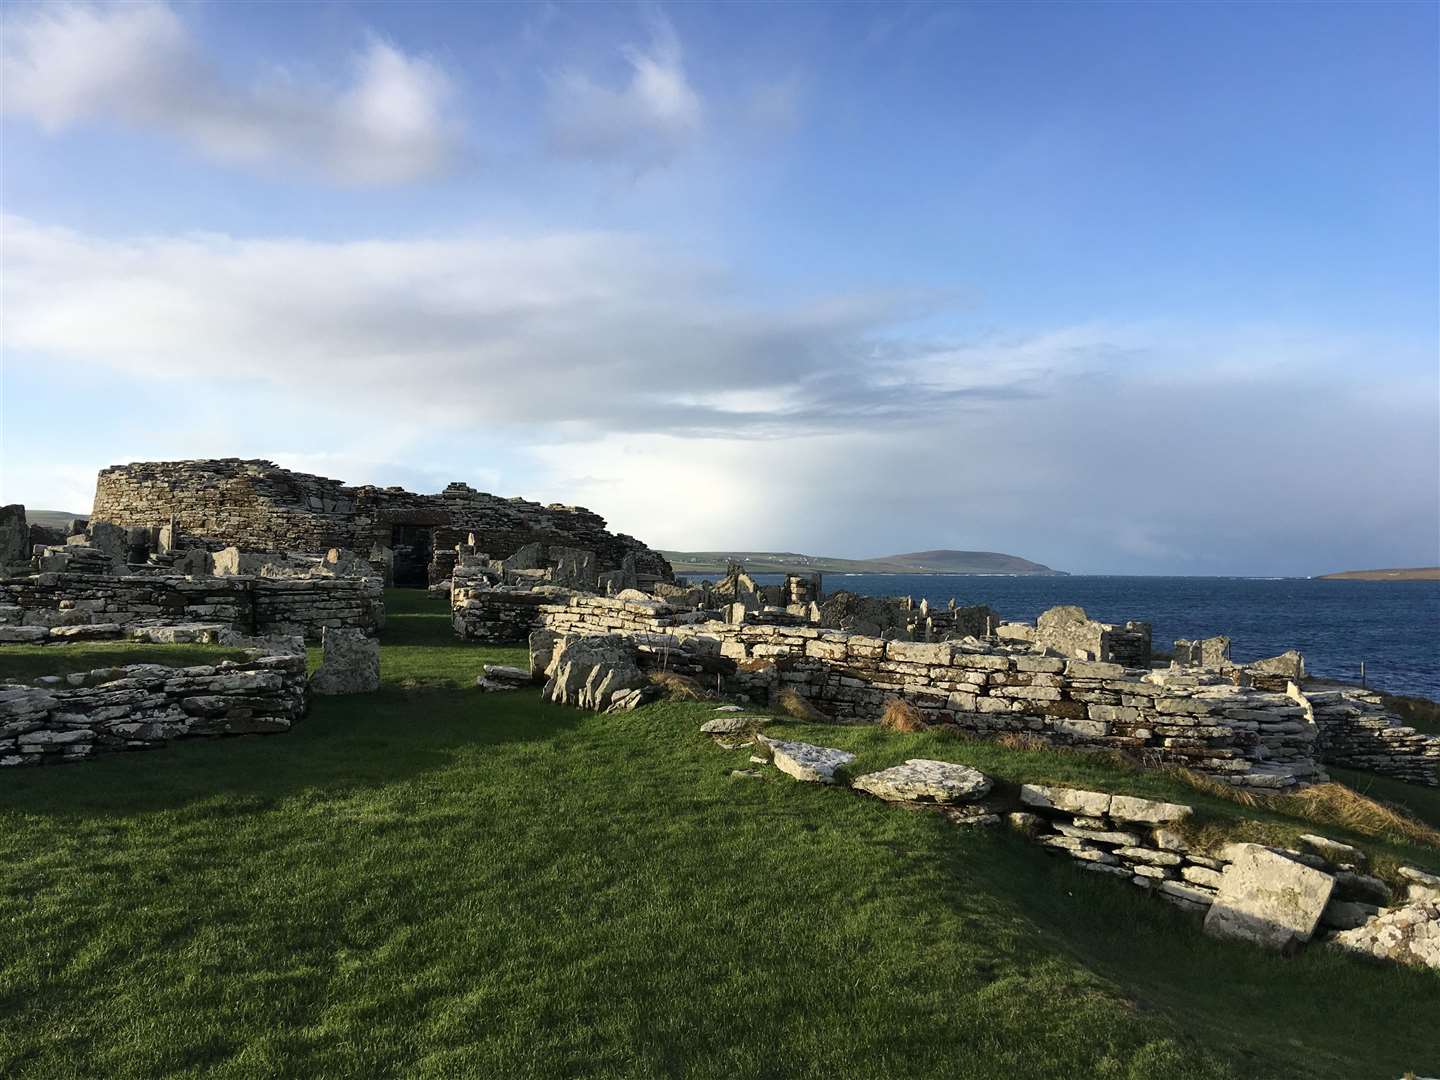 The rich history and heritage of the Orkney islands is the focus of a new project led by north academics.